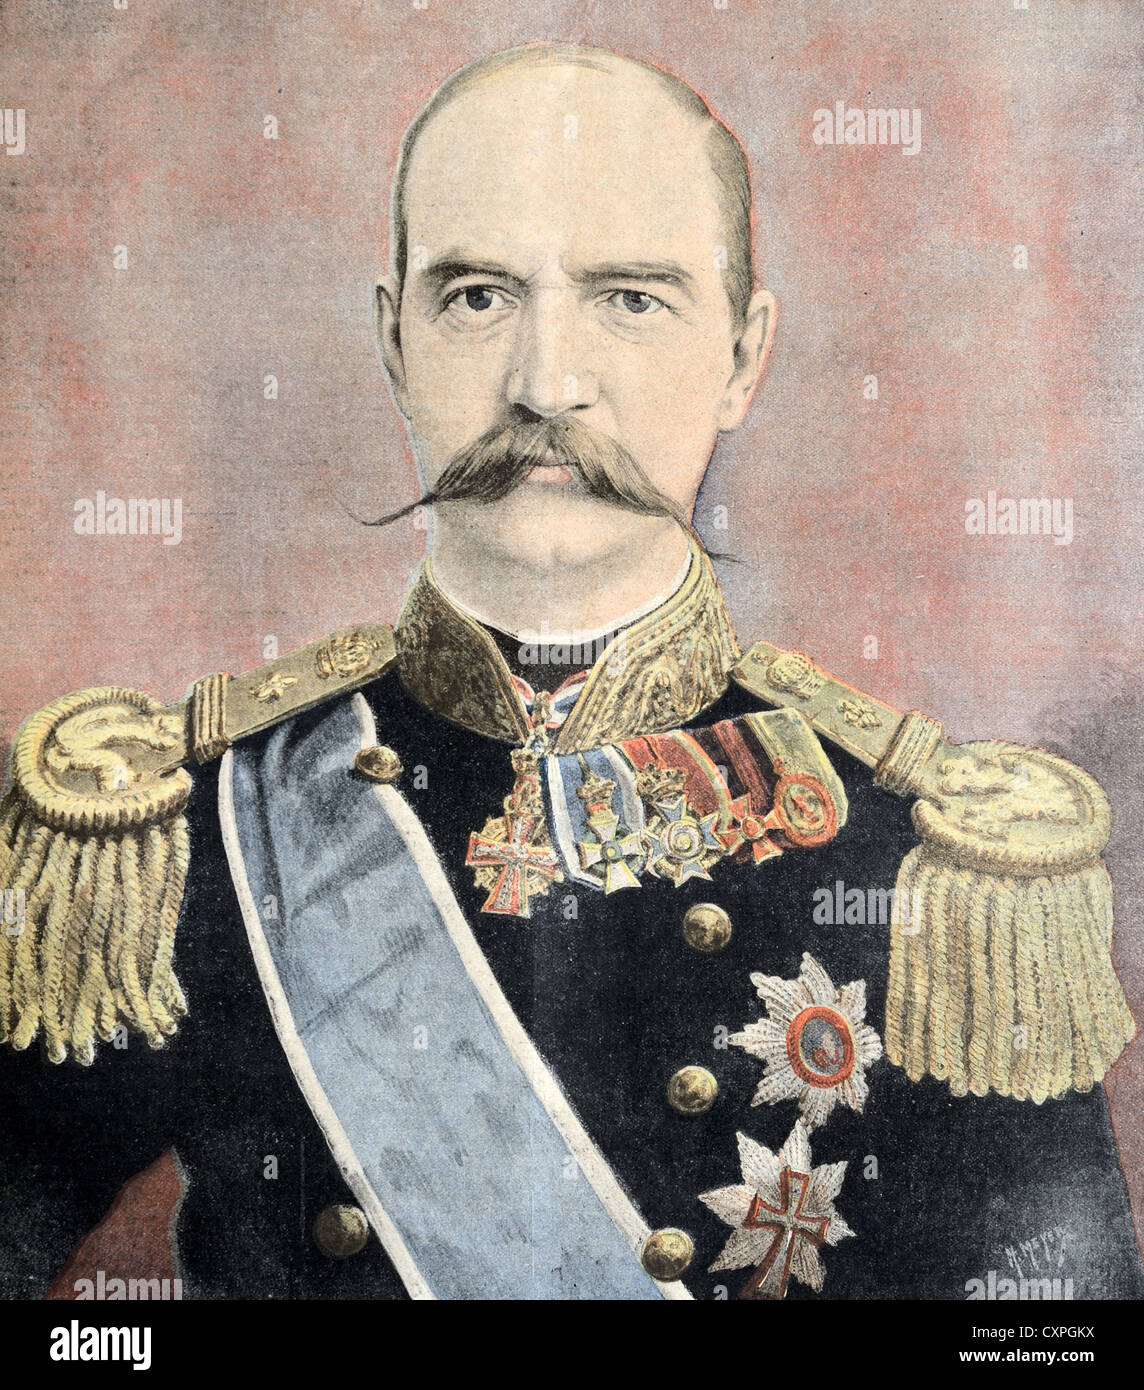 Portrait of King George I of Greece (1845-1913) Dressed in Military Uniform. Vintage Illustration or Old Engraving Stock Photo